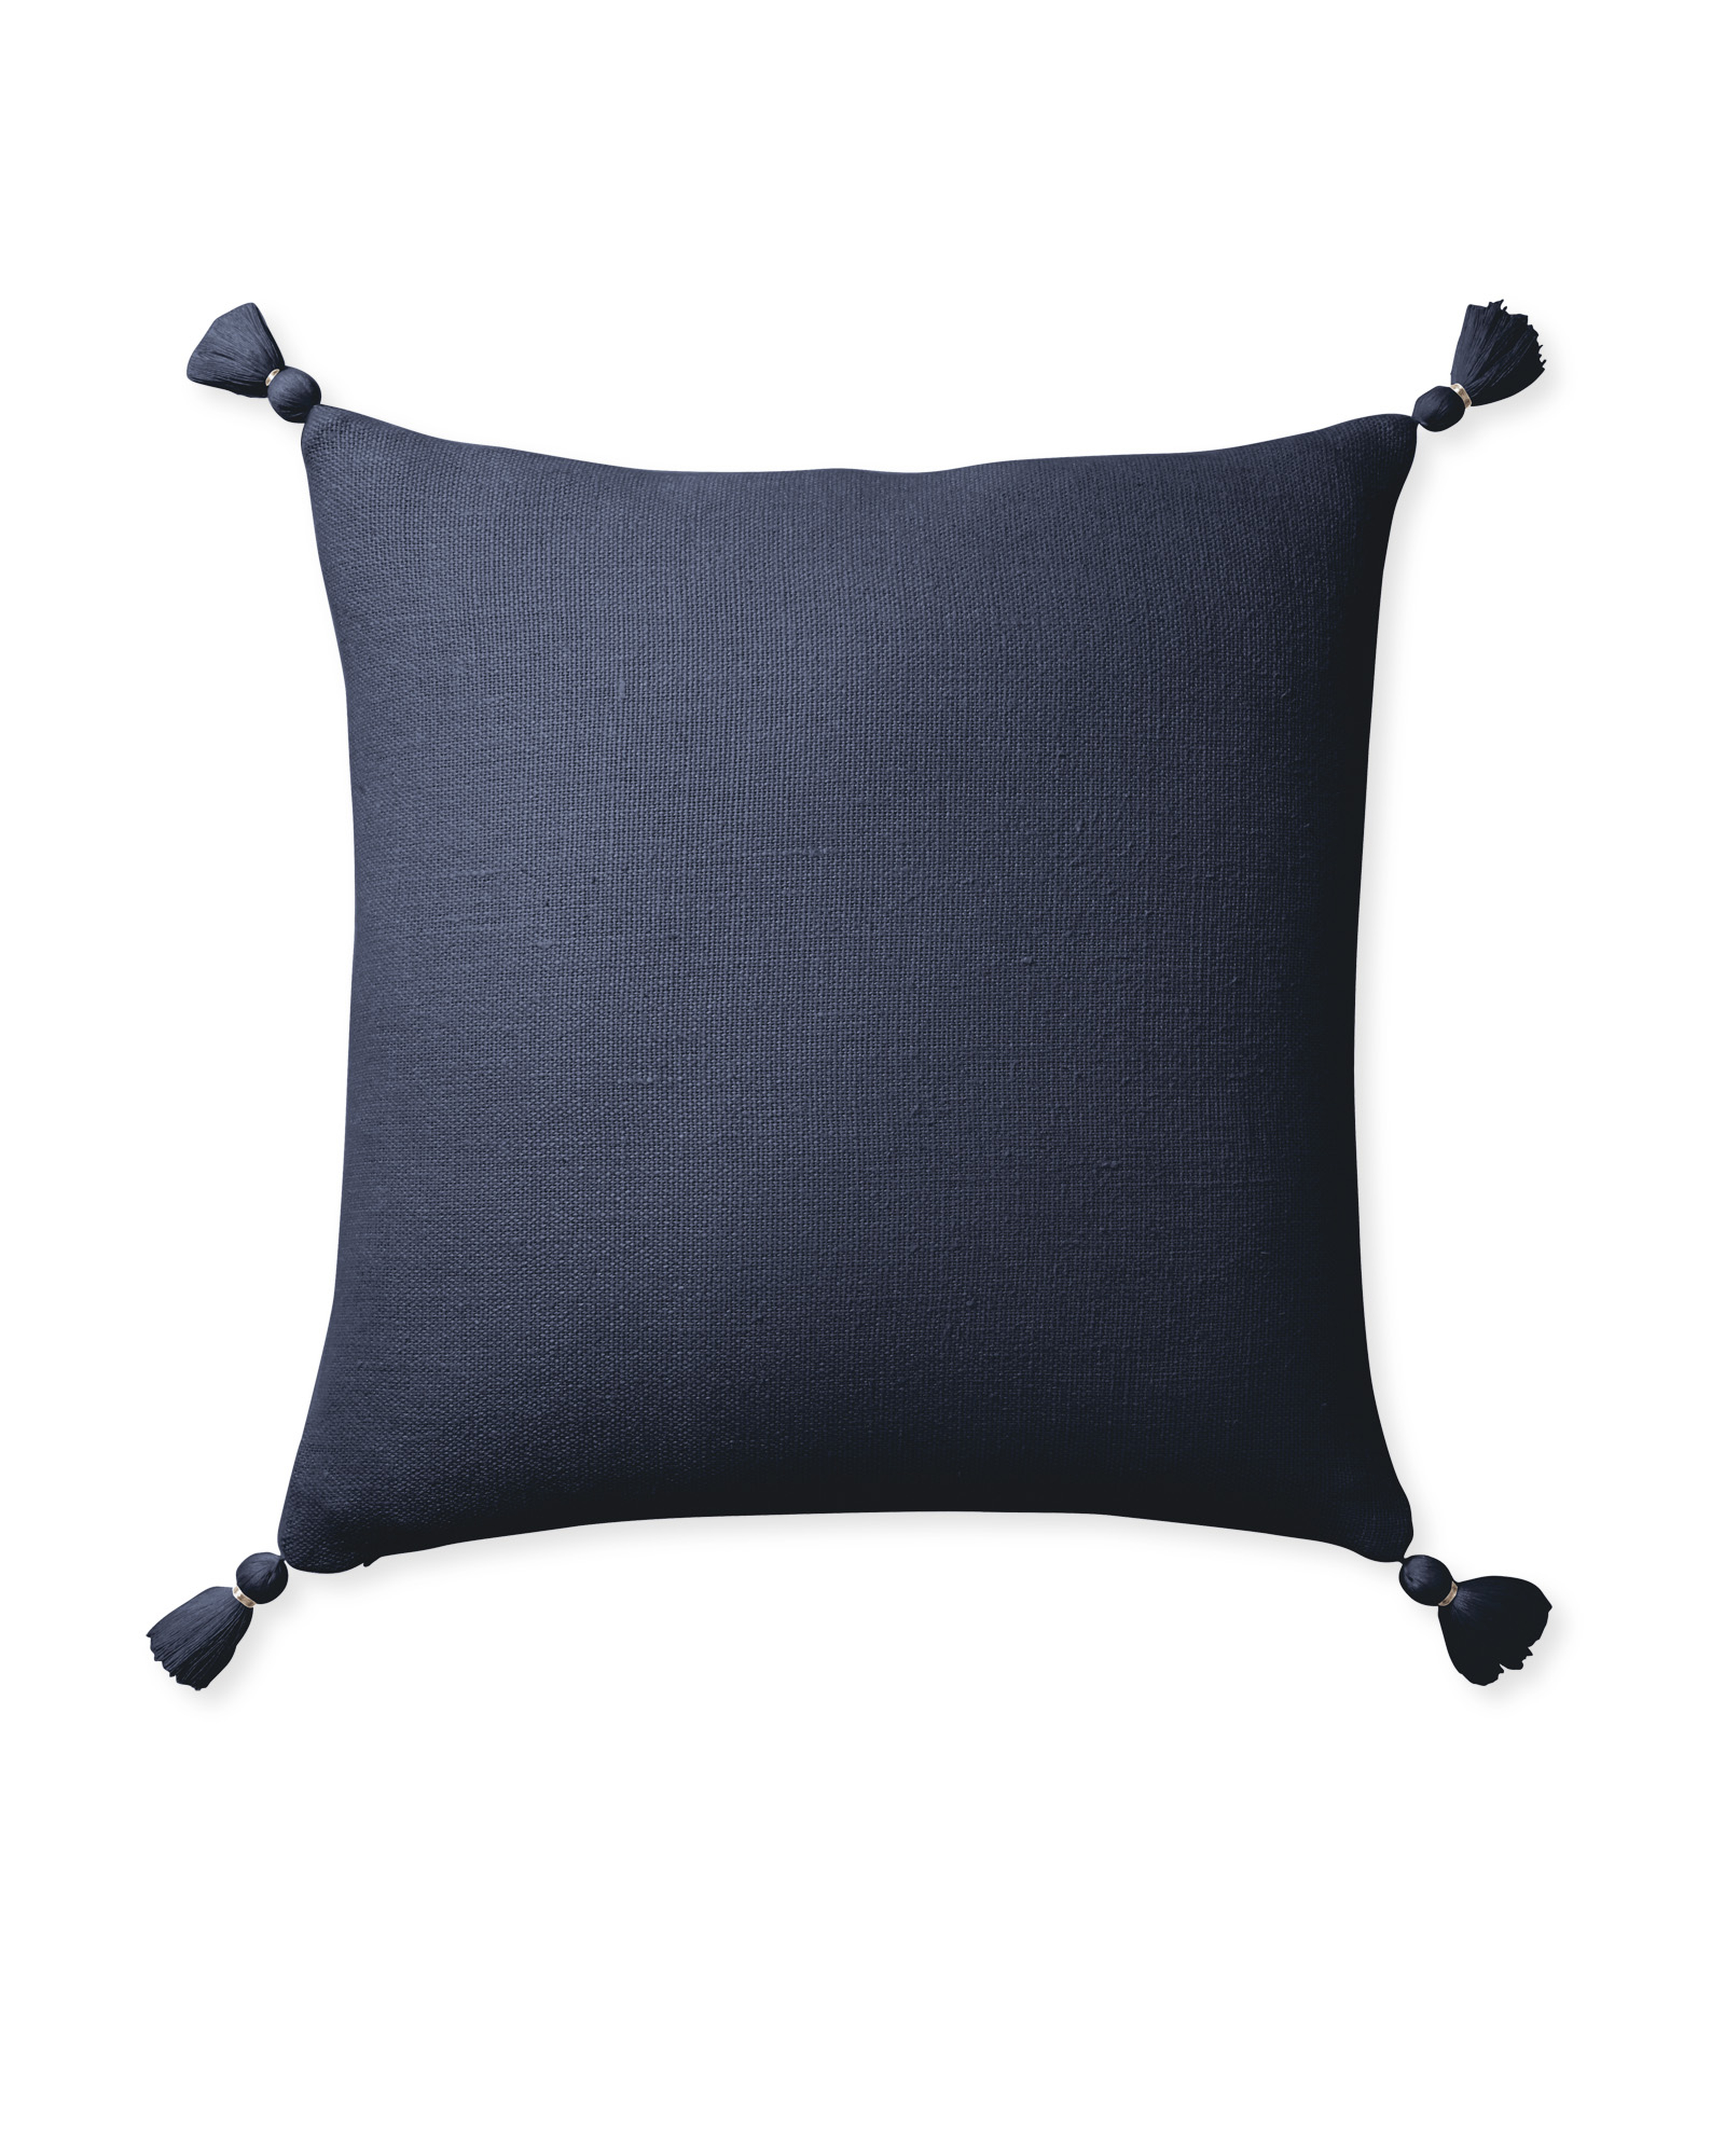 Eva Tassel Pillow Cover - Navy - 20" x 20" - No insert - Serena and Lily